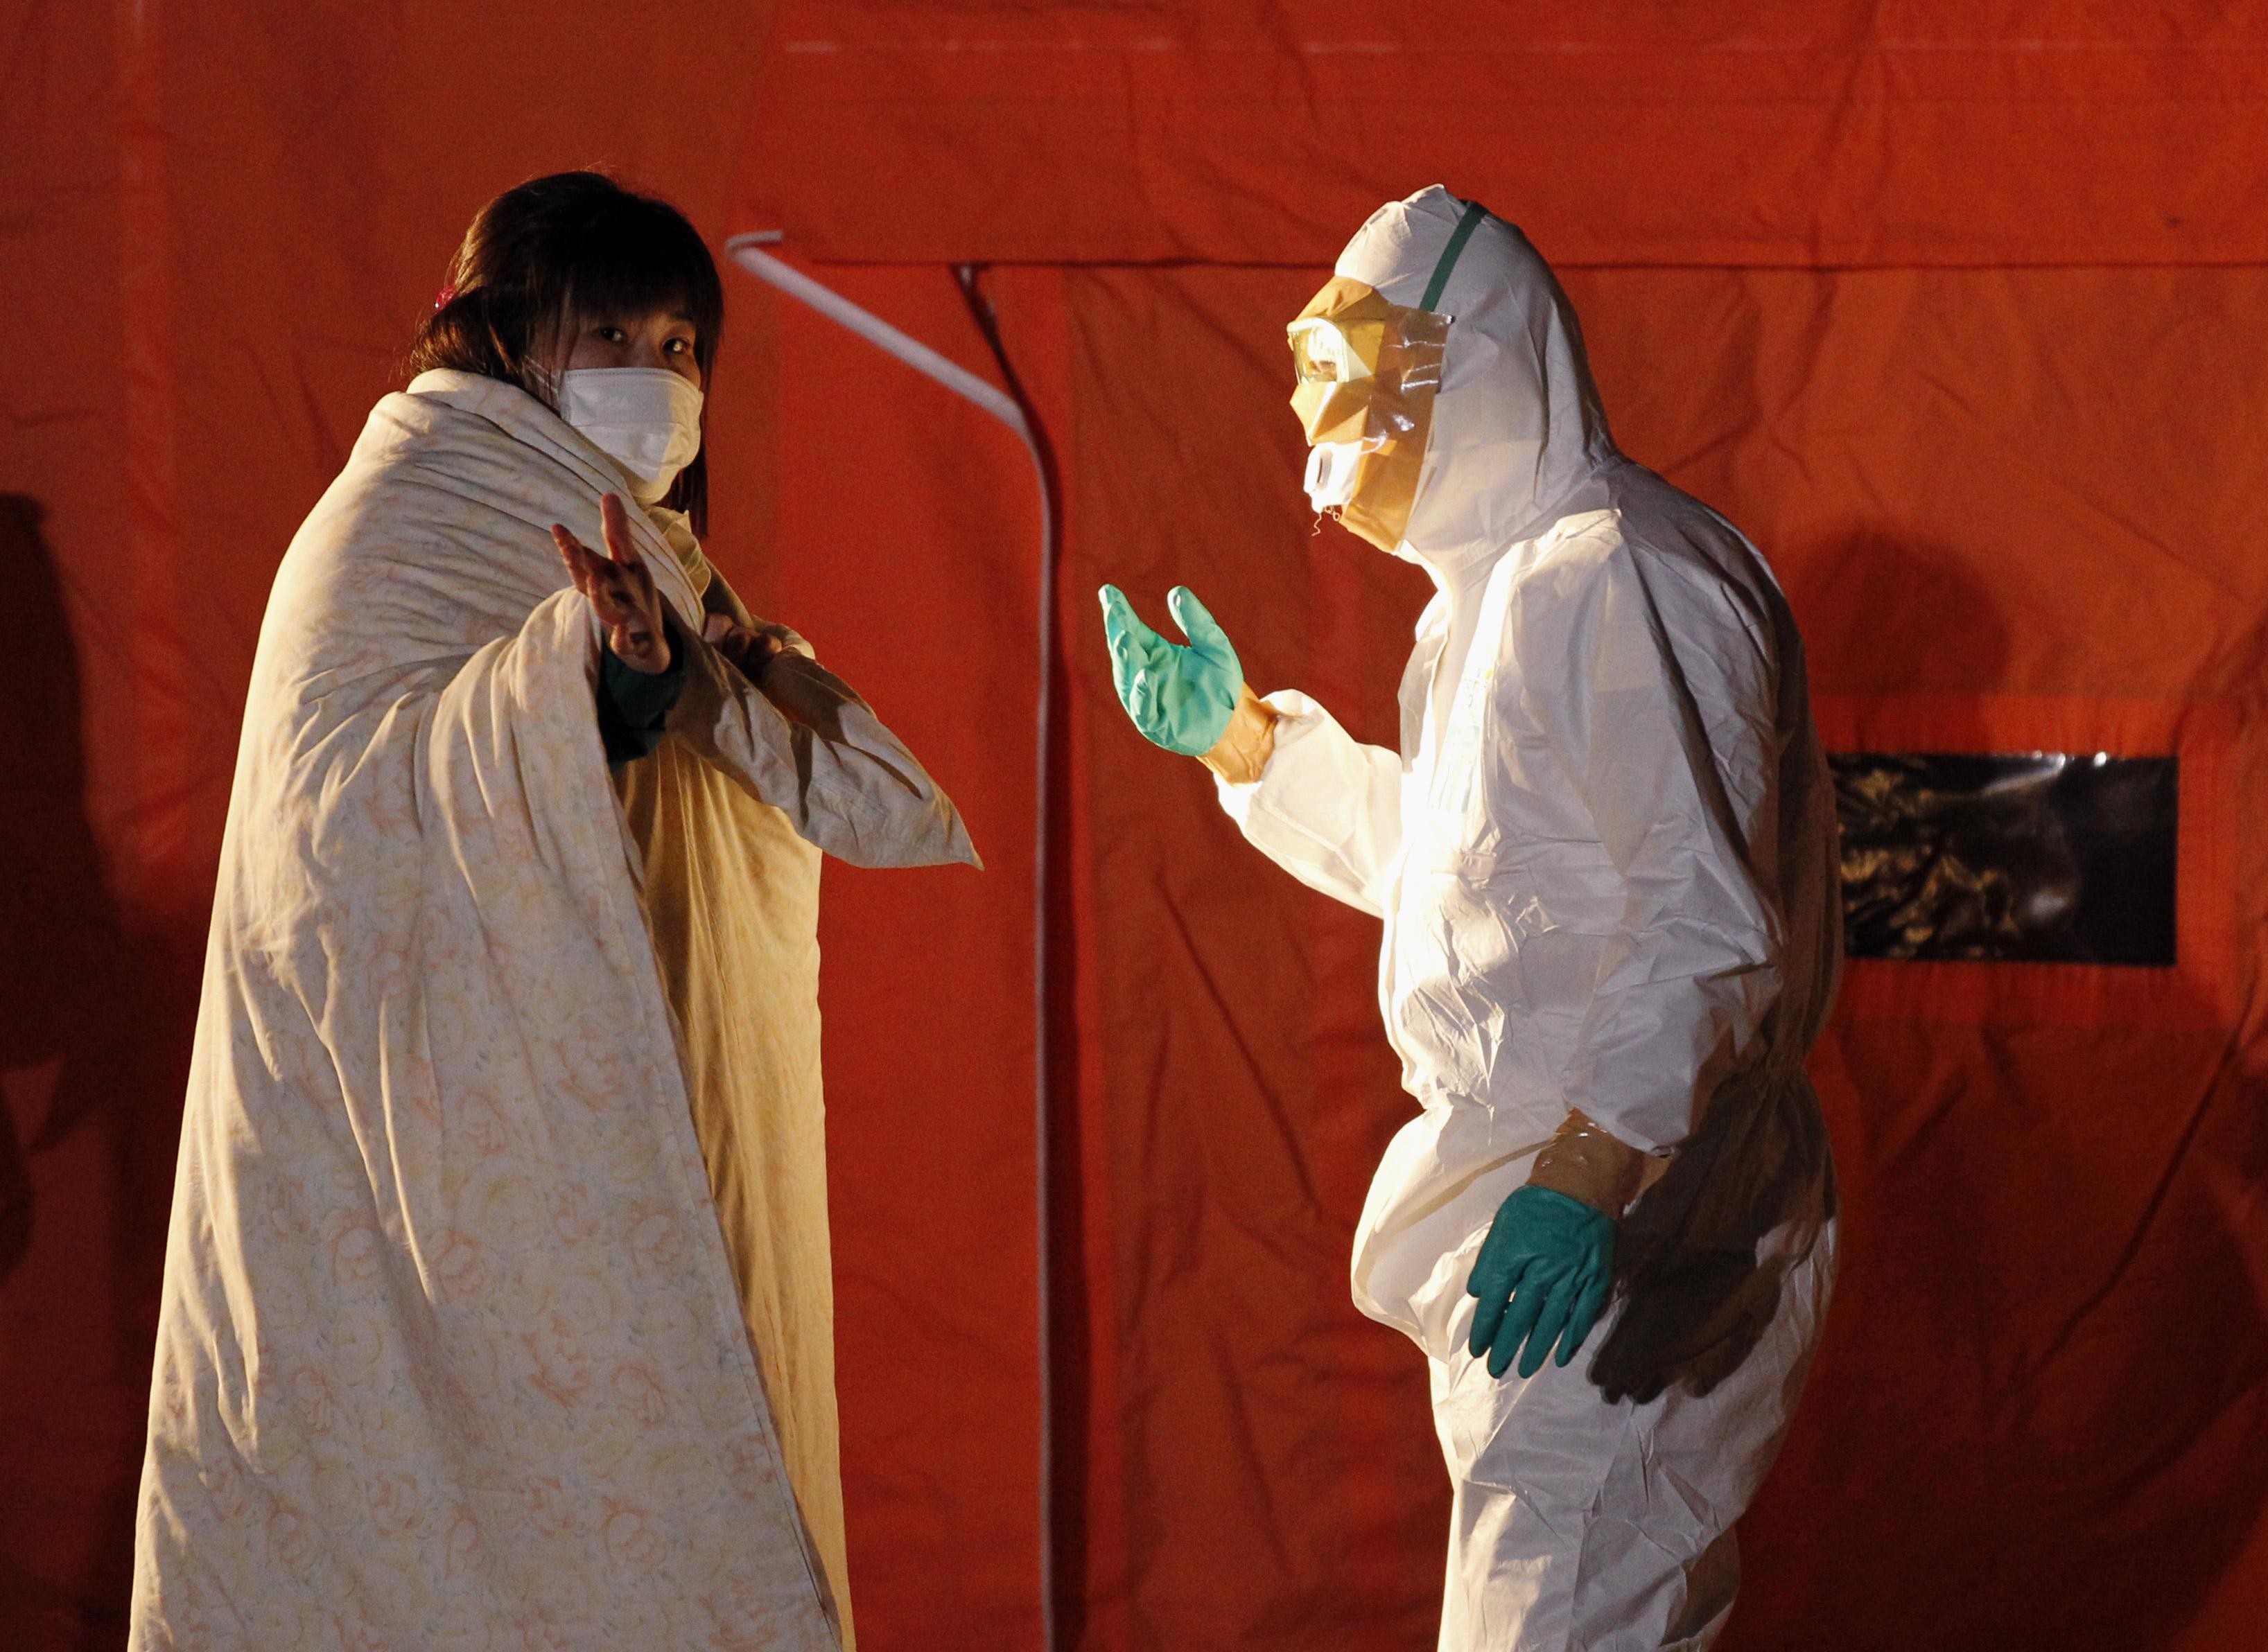 An official in protective gear talks to a woman from the evacuation area near the Fukushima nuclear plant in Koriyama in March 2011. Photo: Reuters